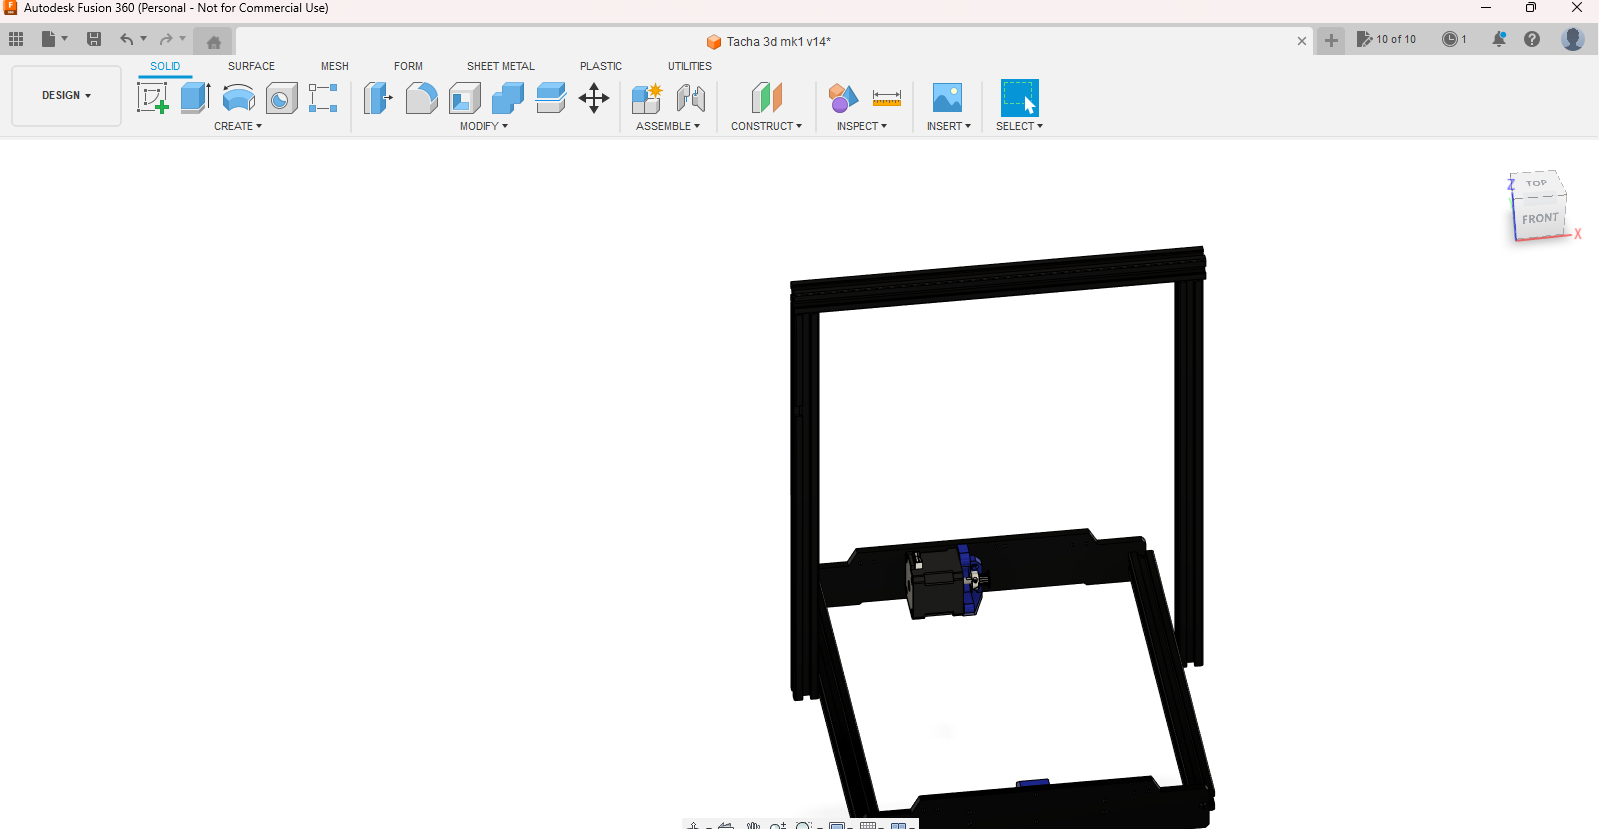 Autodesk Fusion 360 (Personal - Not for Commercial Use) 6_30_2023 9_16_27 PM.png